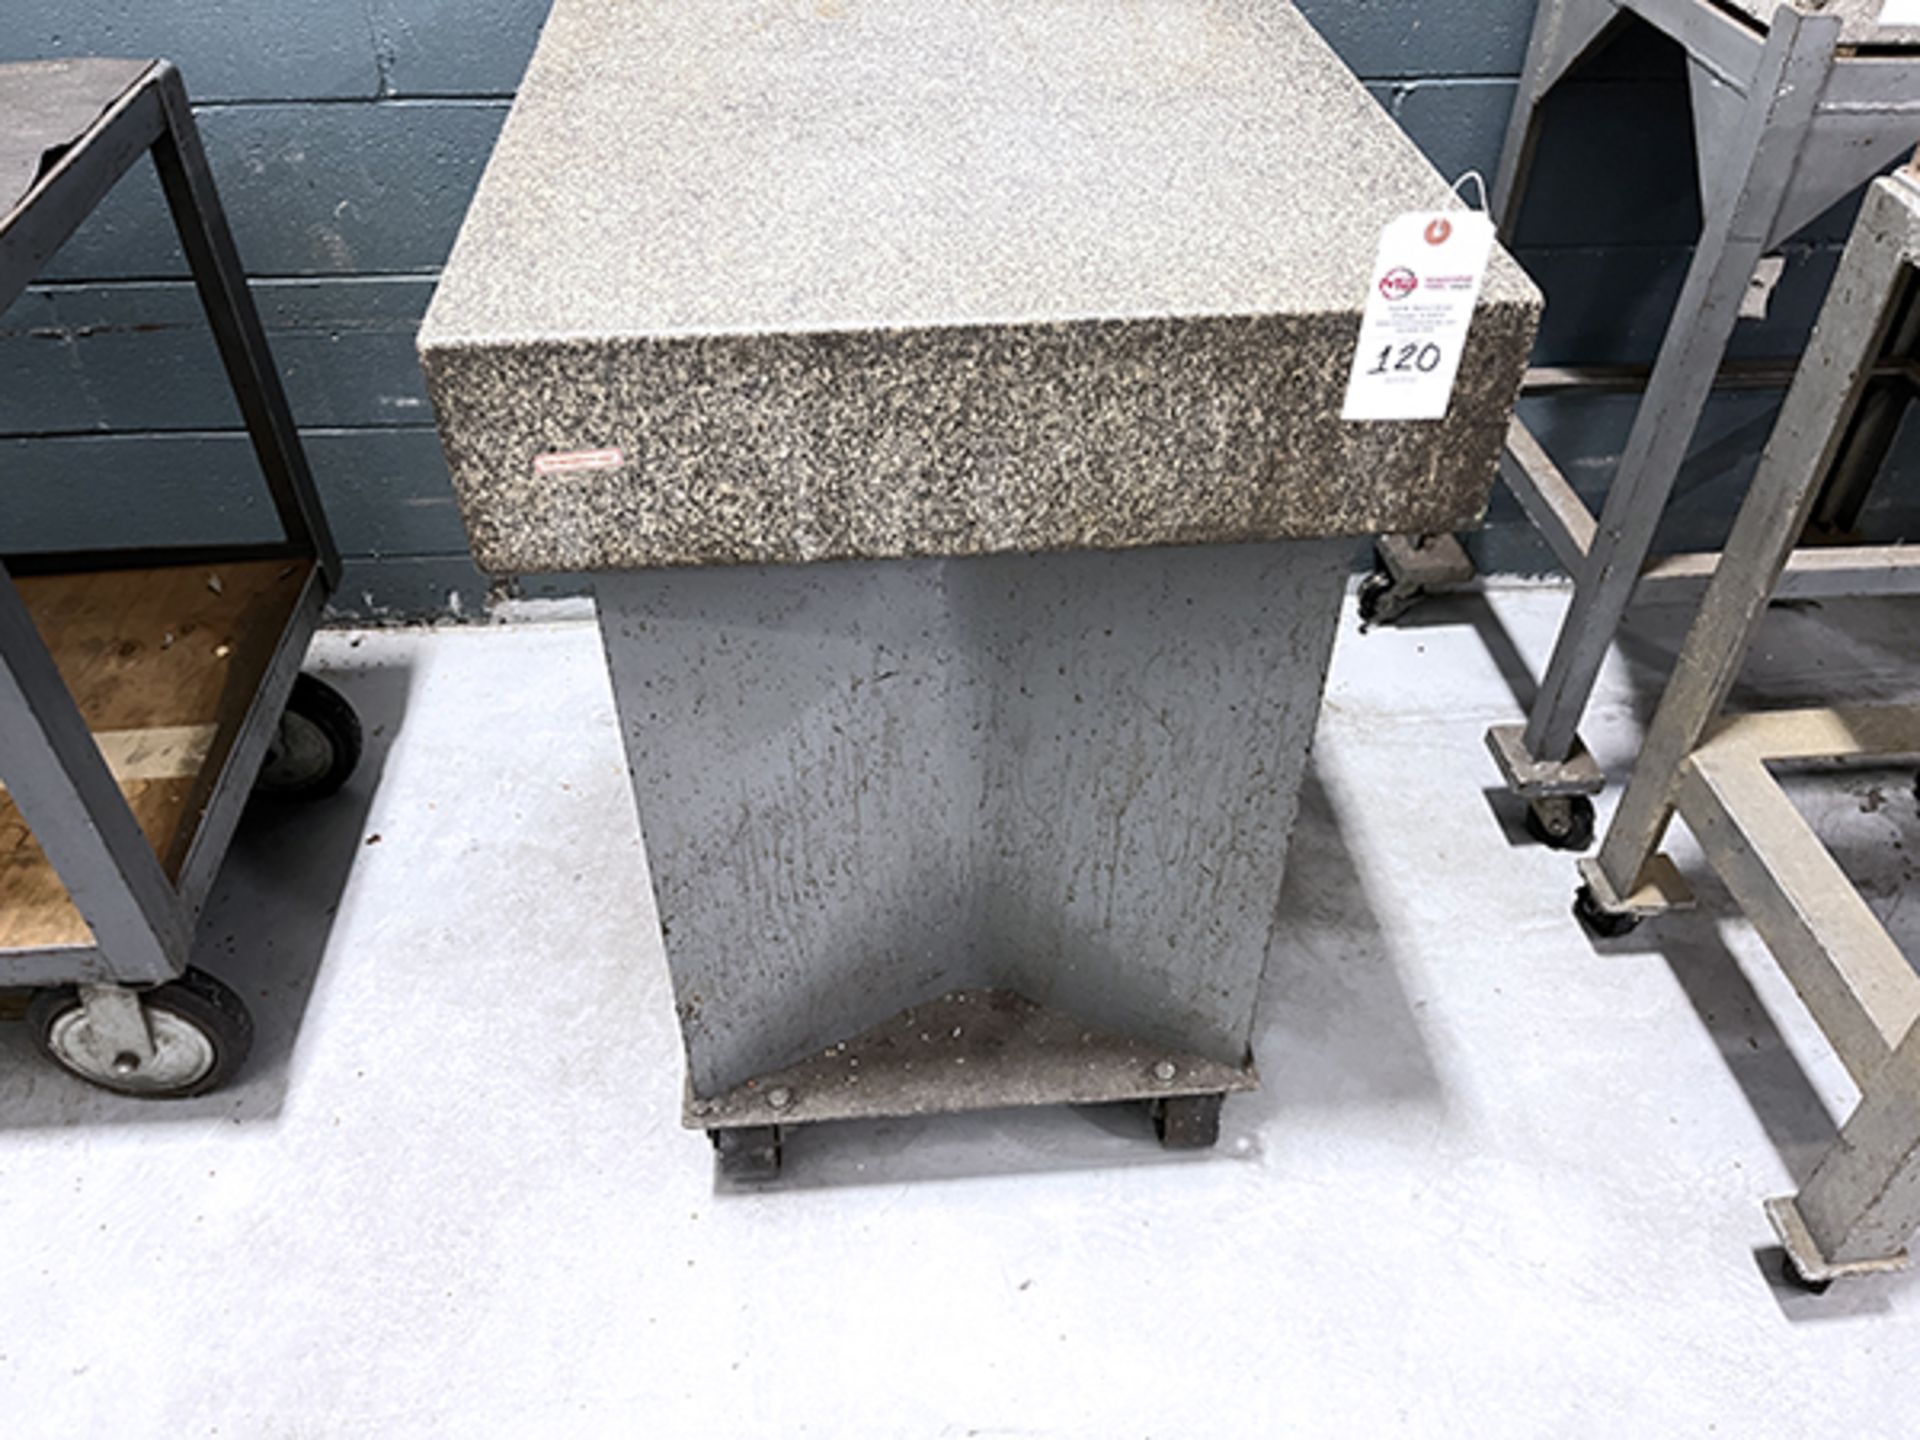 36" x 24" x 4" Granite Surface Plate - Image 4 of 5